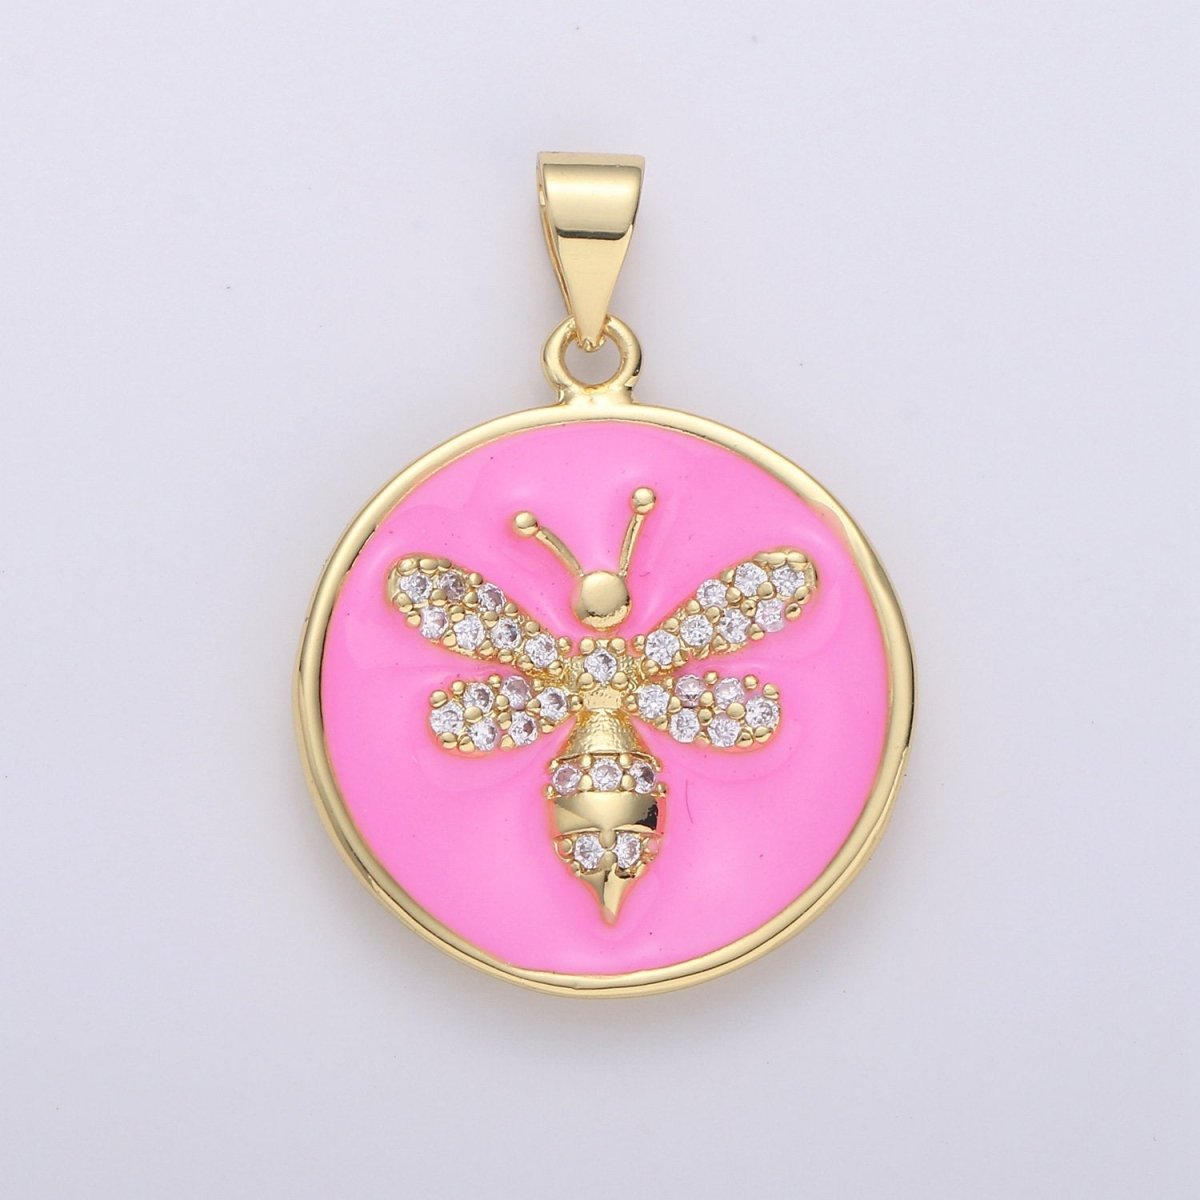 Pink Enamel Bee Charms, Blue Enamel Bee, Gold Cubic Bee charm in Round DIsc Charm Medallion for Necklace Pastel Bumbell bee charm I-848 - DLUXCA